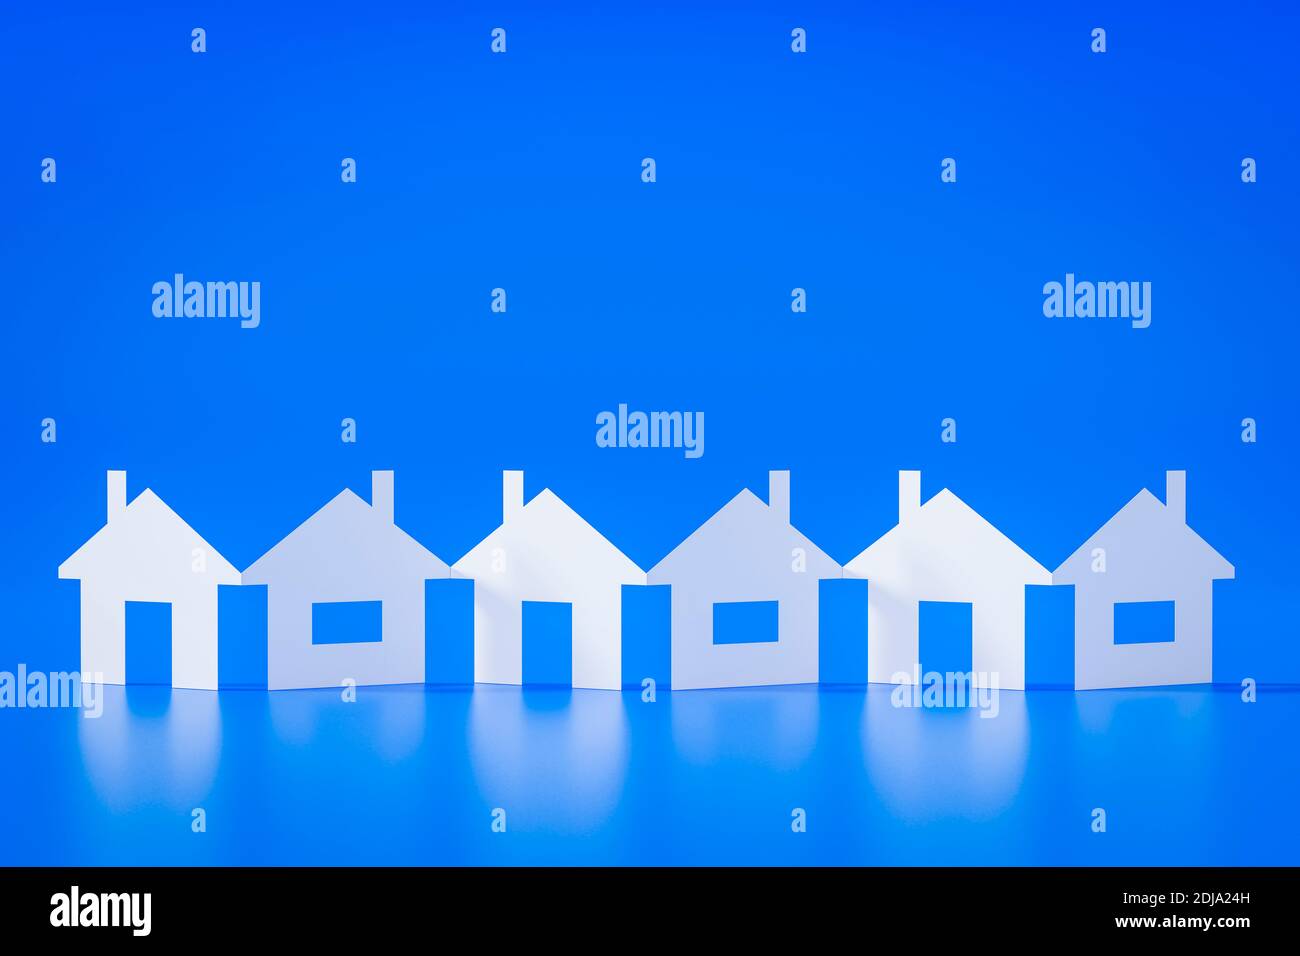 3d illustration of a paper cutout row of houses blue background Stock Photo